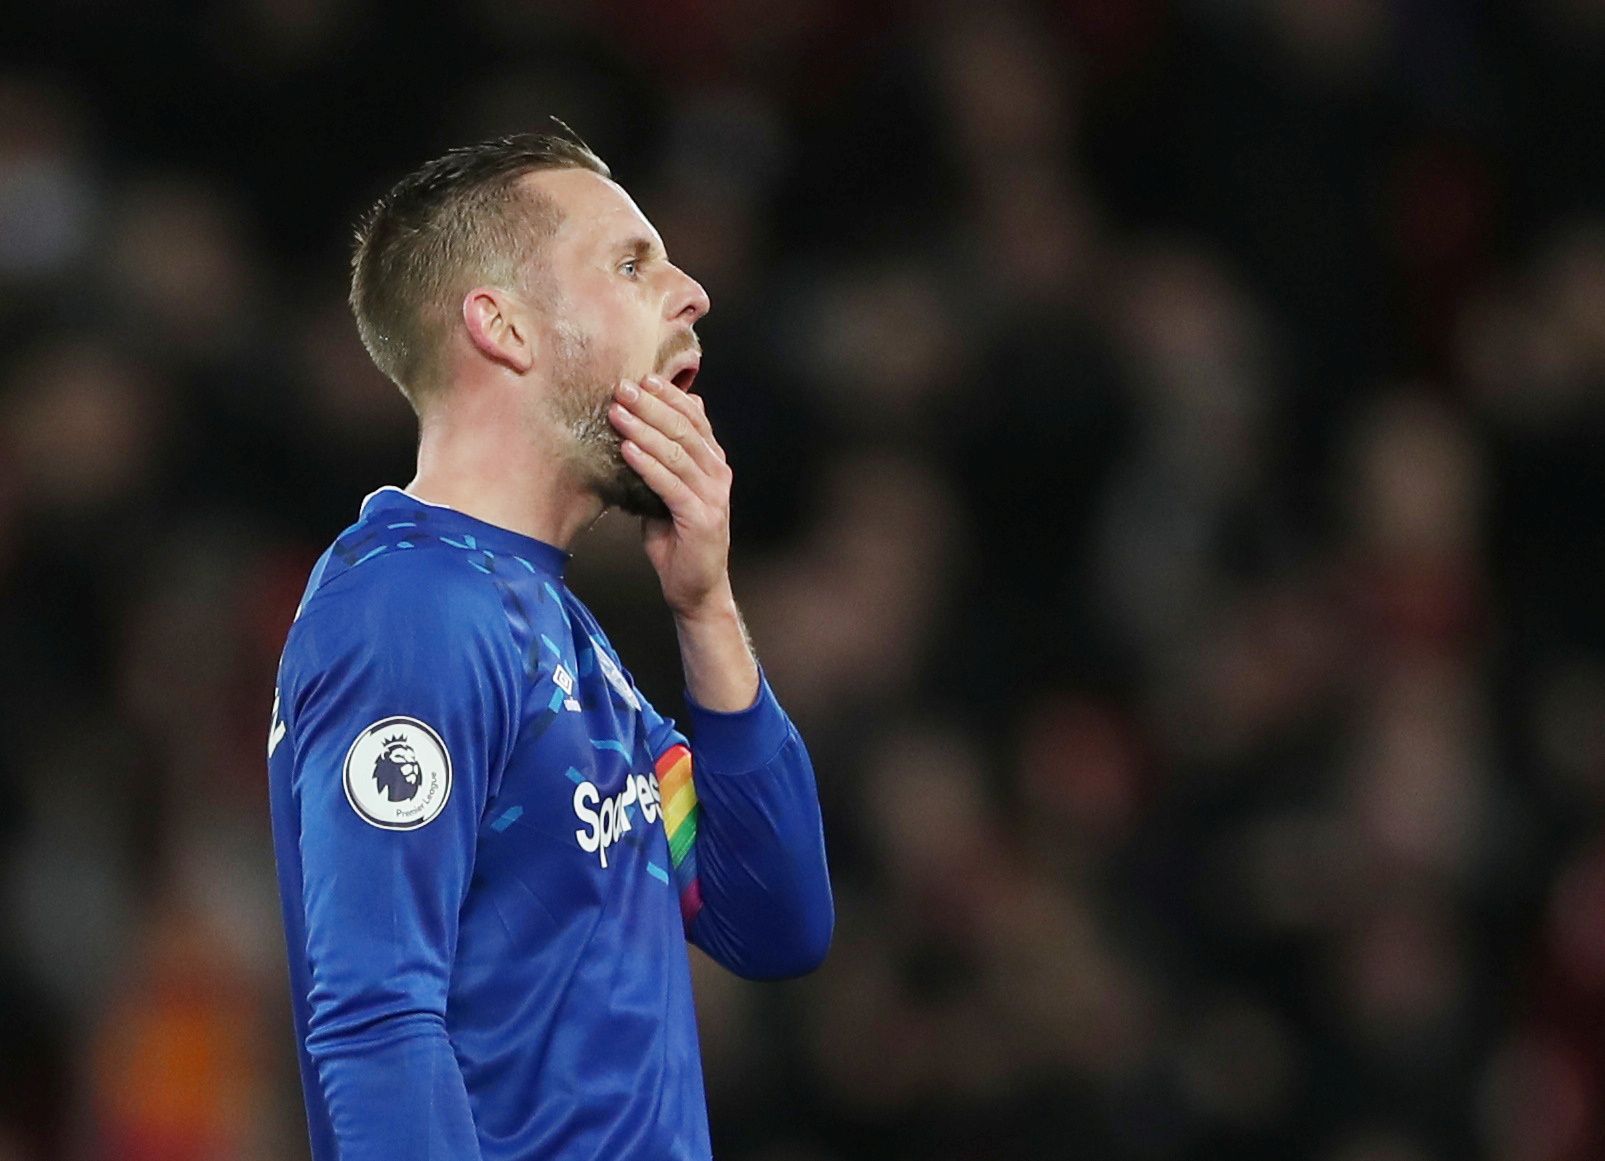 Soccer Football - Premier League - Liverpool v Everton - Anfield, Liverpool, Britain - December 4, 2019  Everton's Gylfi Sigurdsson looks dejected after the match   Action Images via Reuters/Lee Smith  EDITORIAL USE ONLY. No use with unauthorized audio, video, data, fixture lists, club/league logos or 